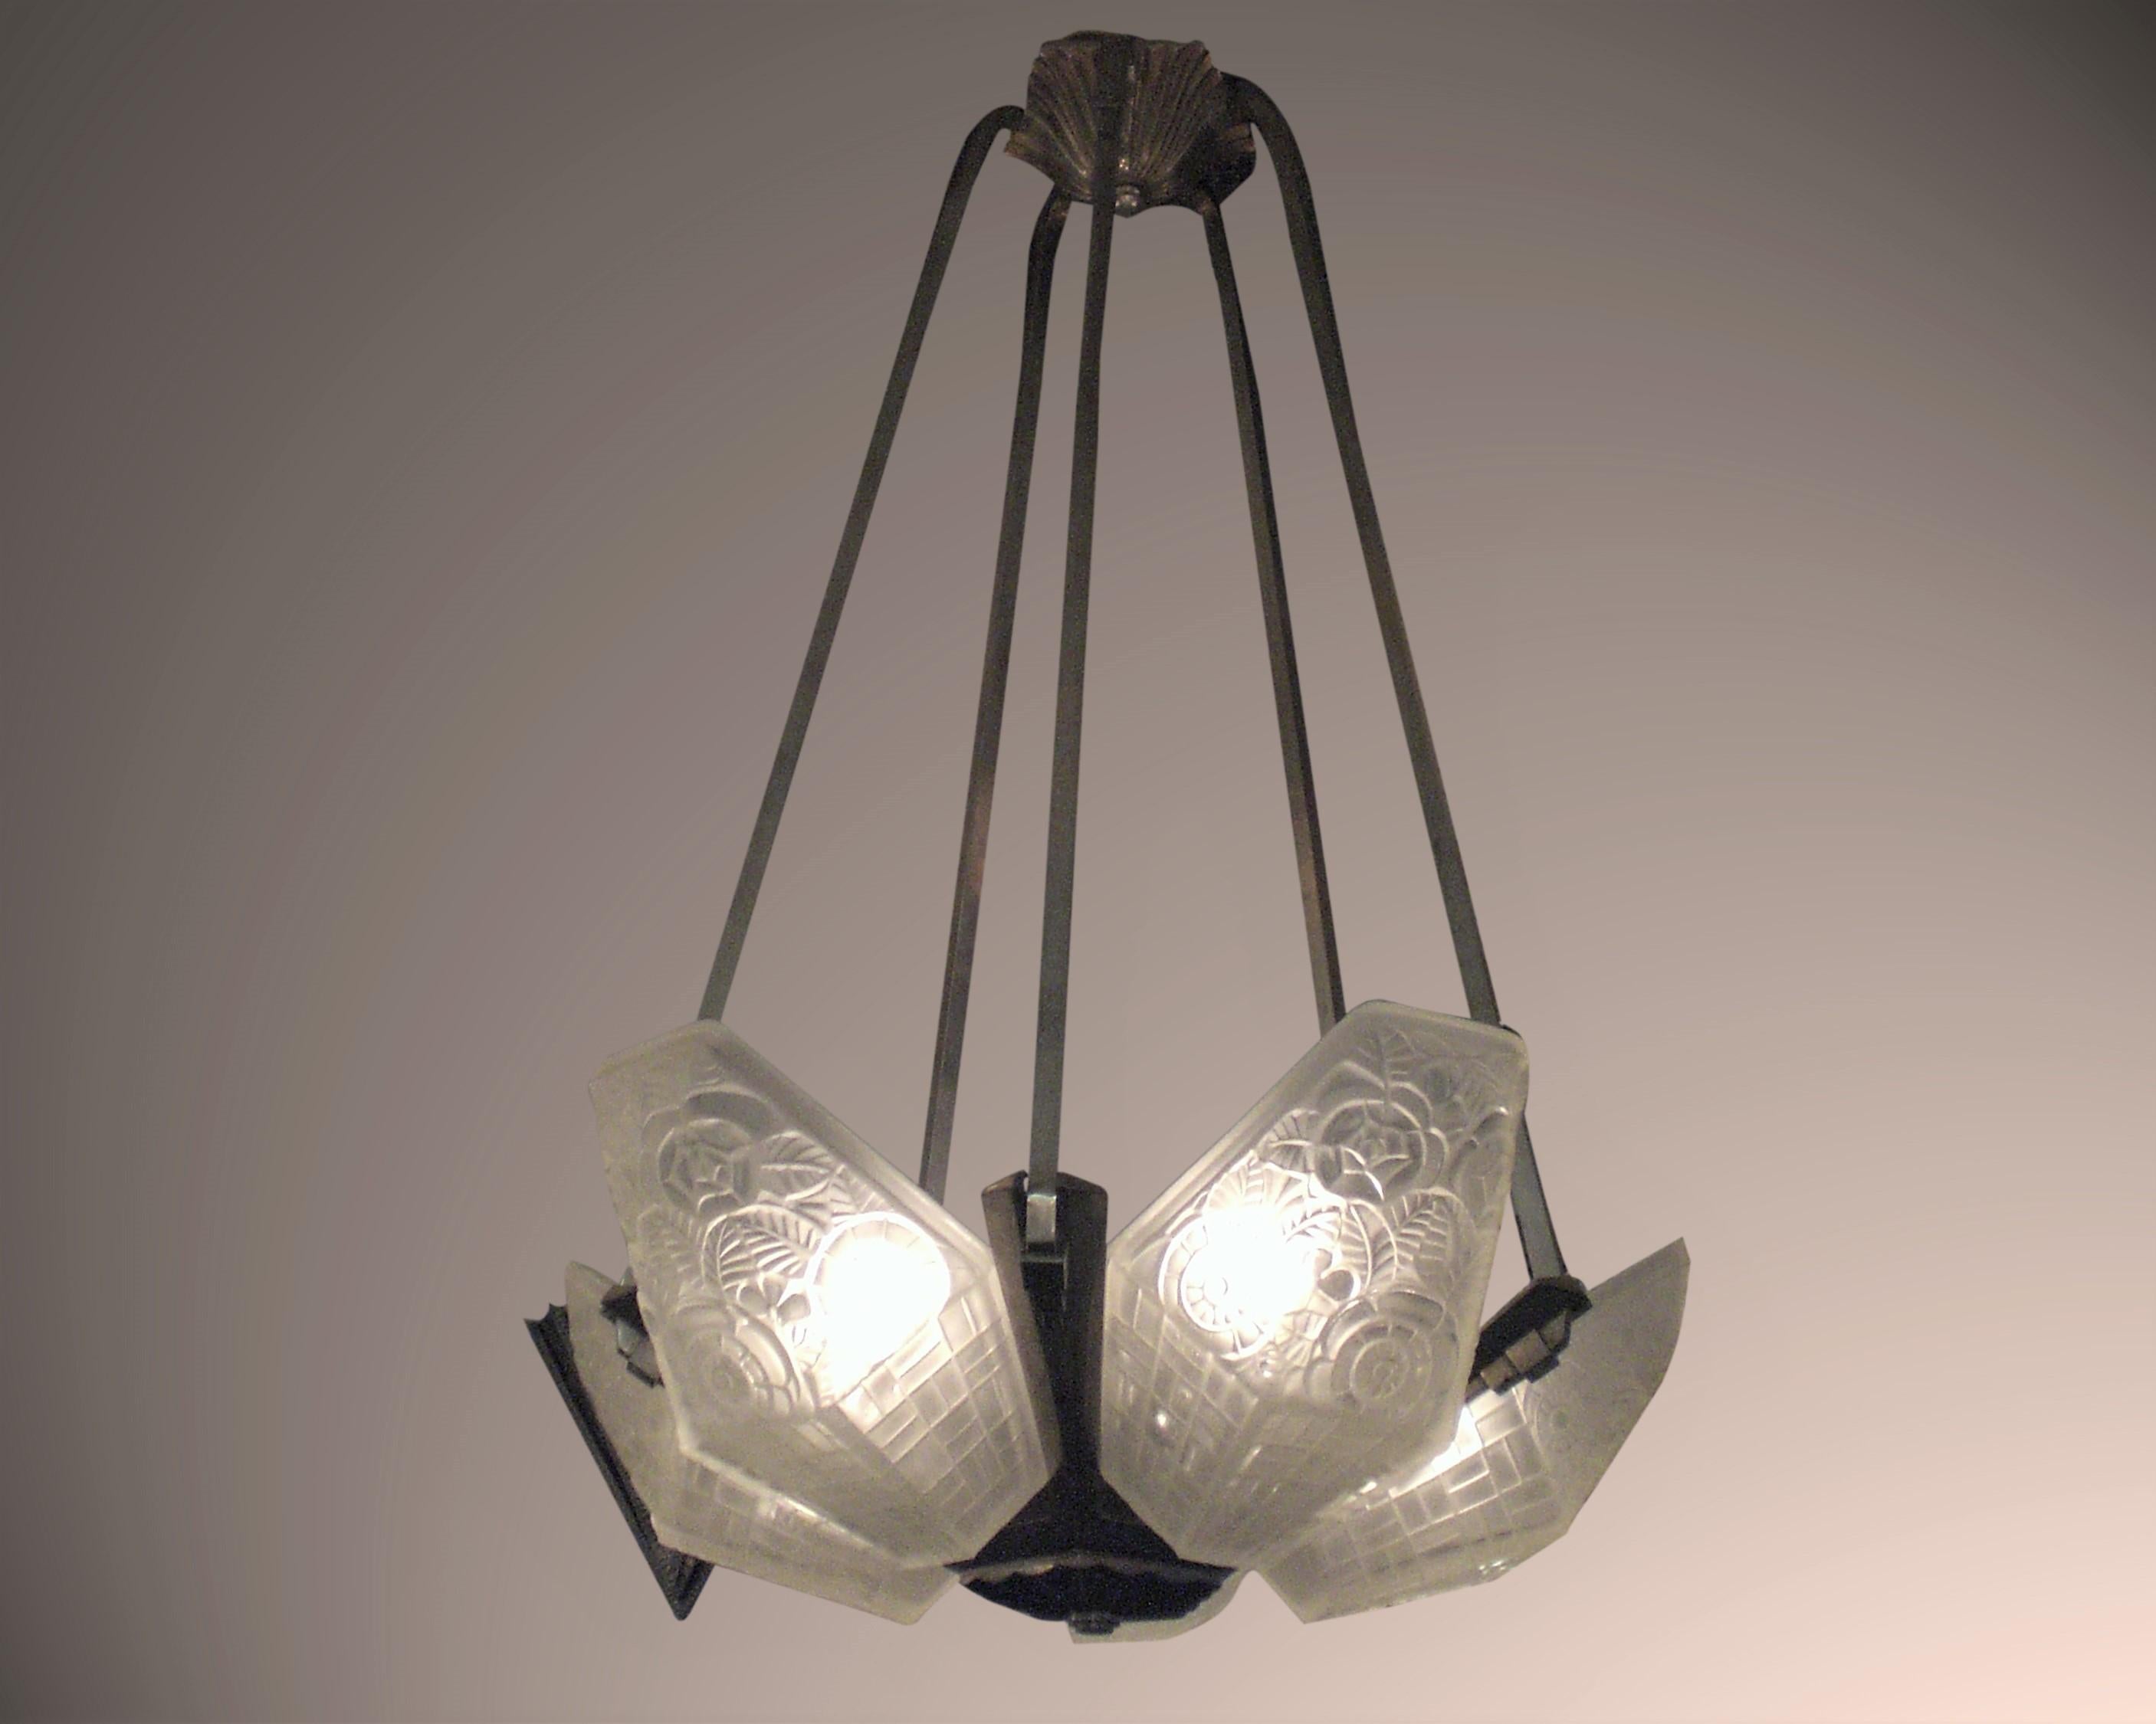 An original French Art Deco period frosted art glass chandelier. Five angular panels with geometric motif of basket weave and stylized floral pattern, mounted in original nickeled bronze armature. Attributed to Hugue.
Original nickeled finish with